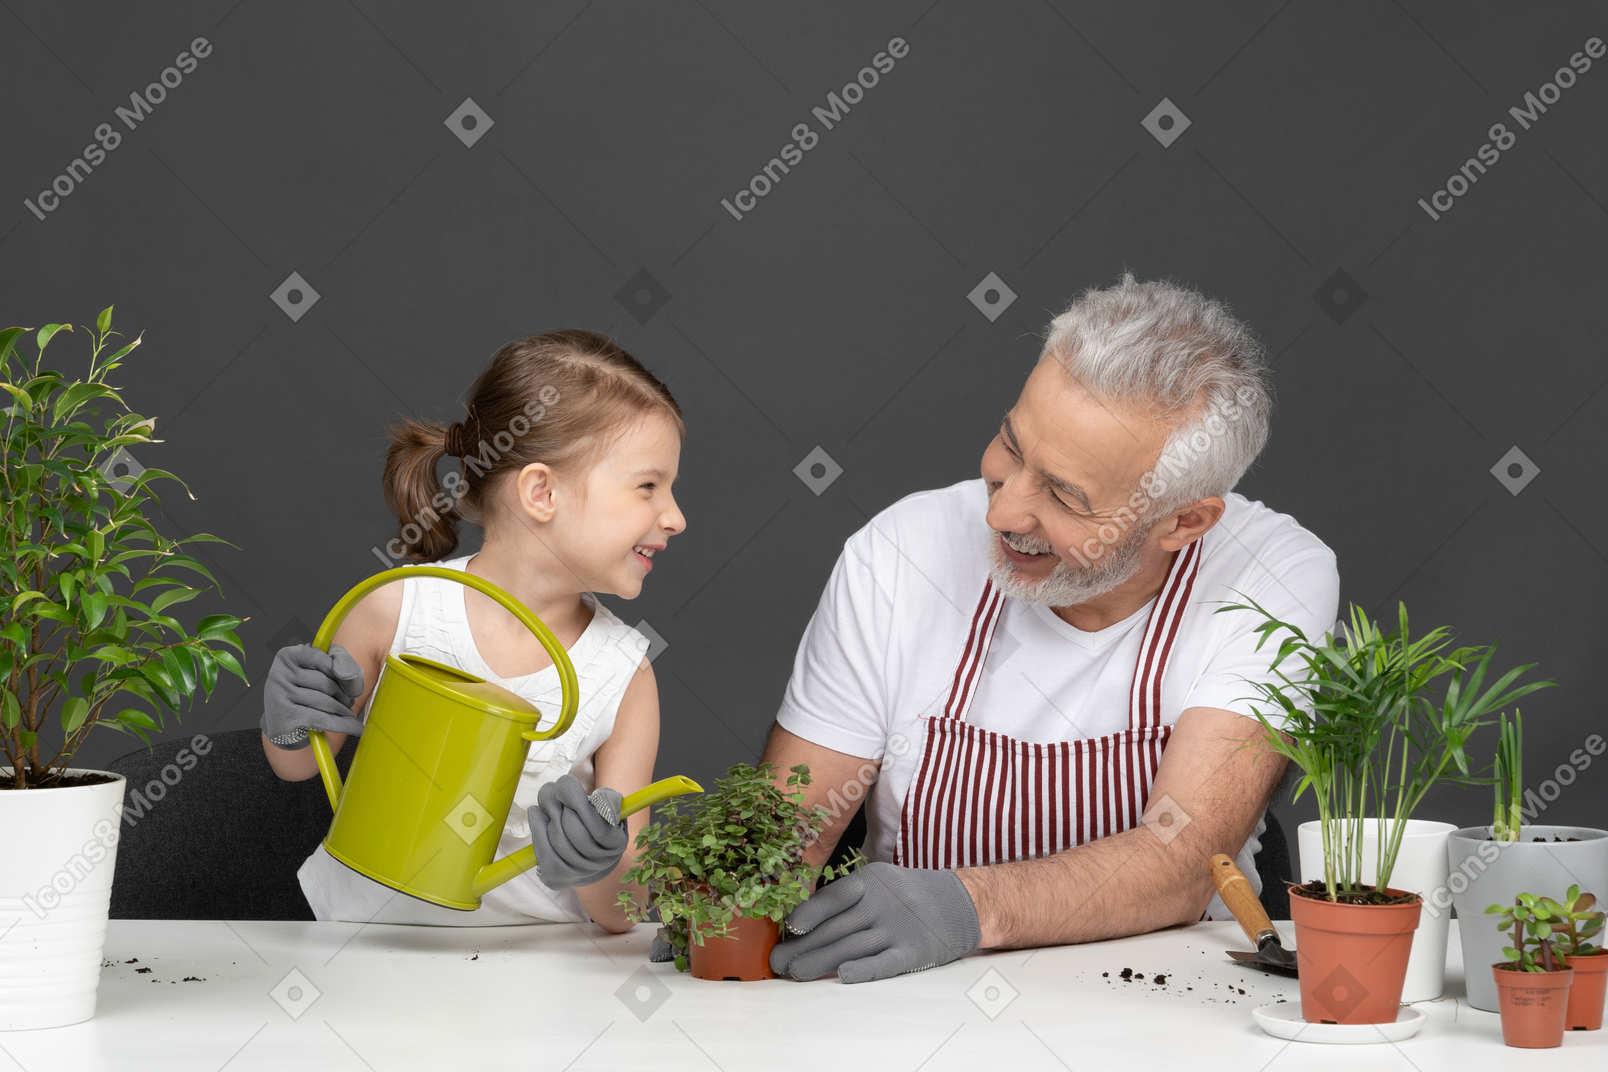 A little girl watering a plant